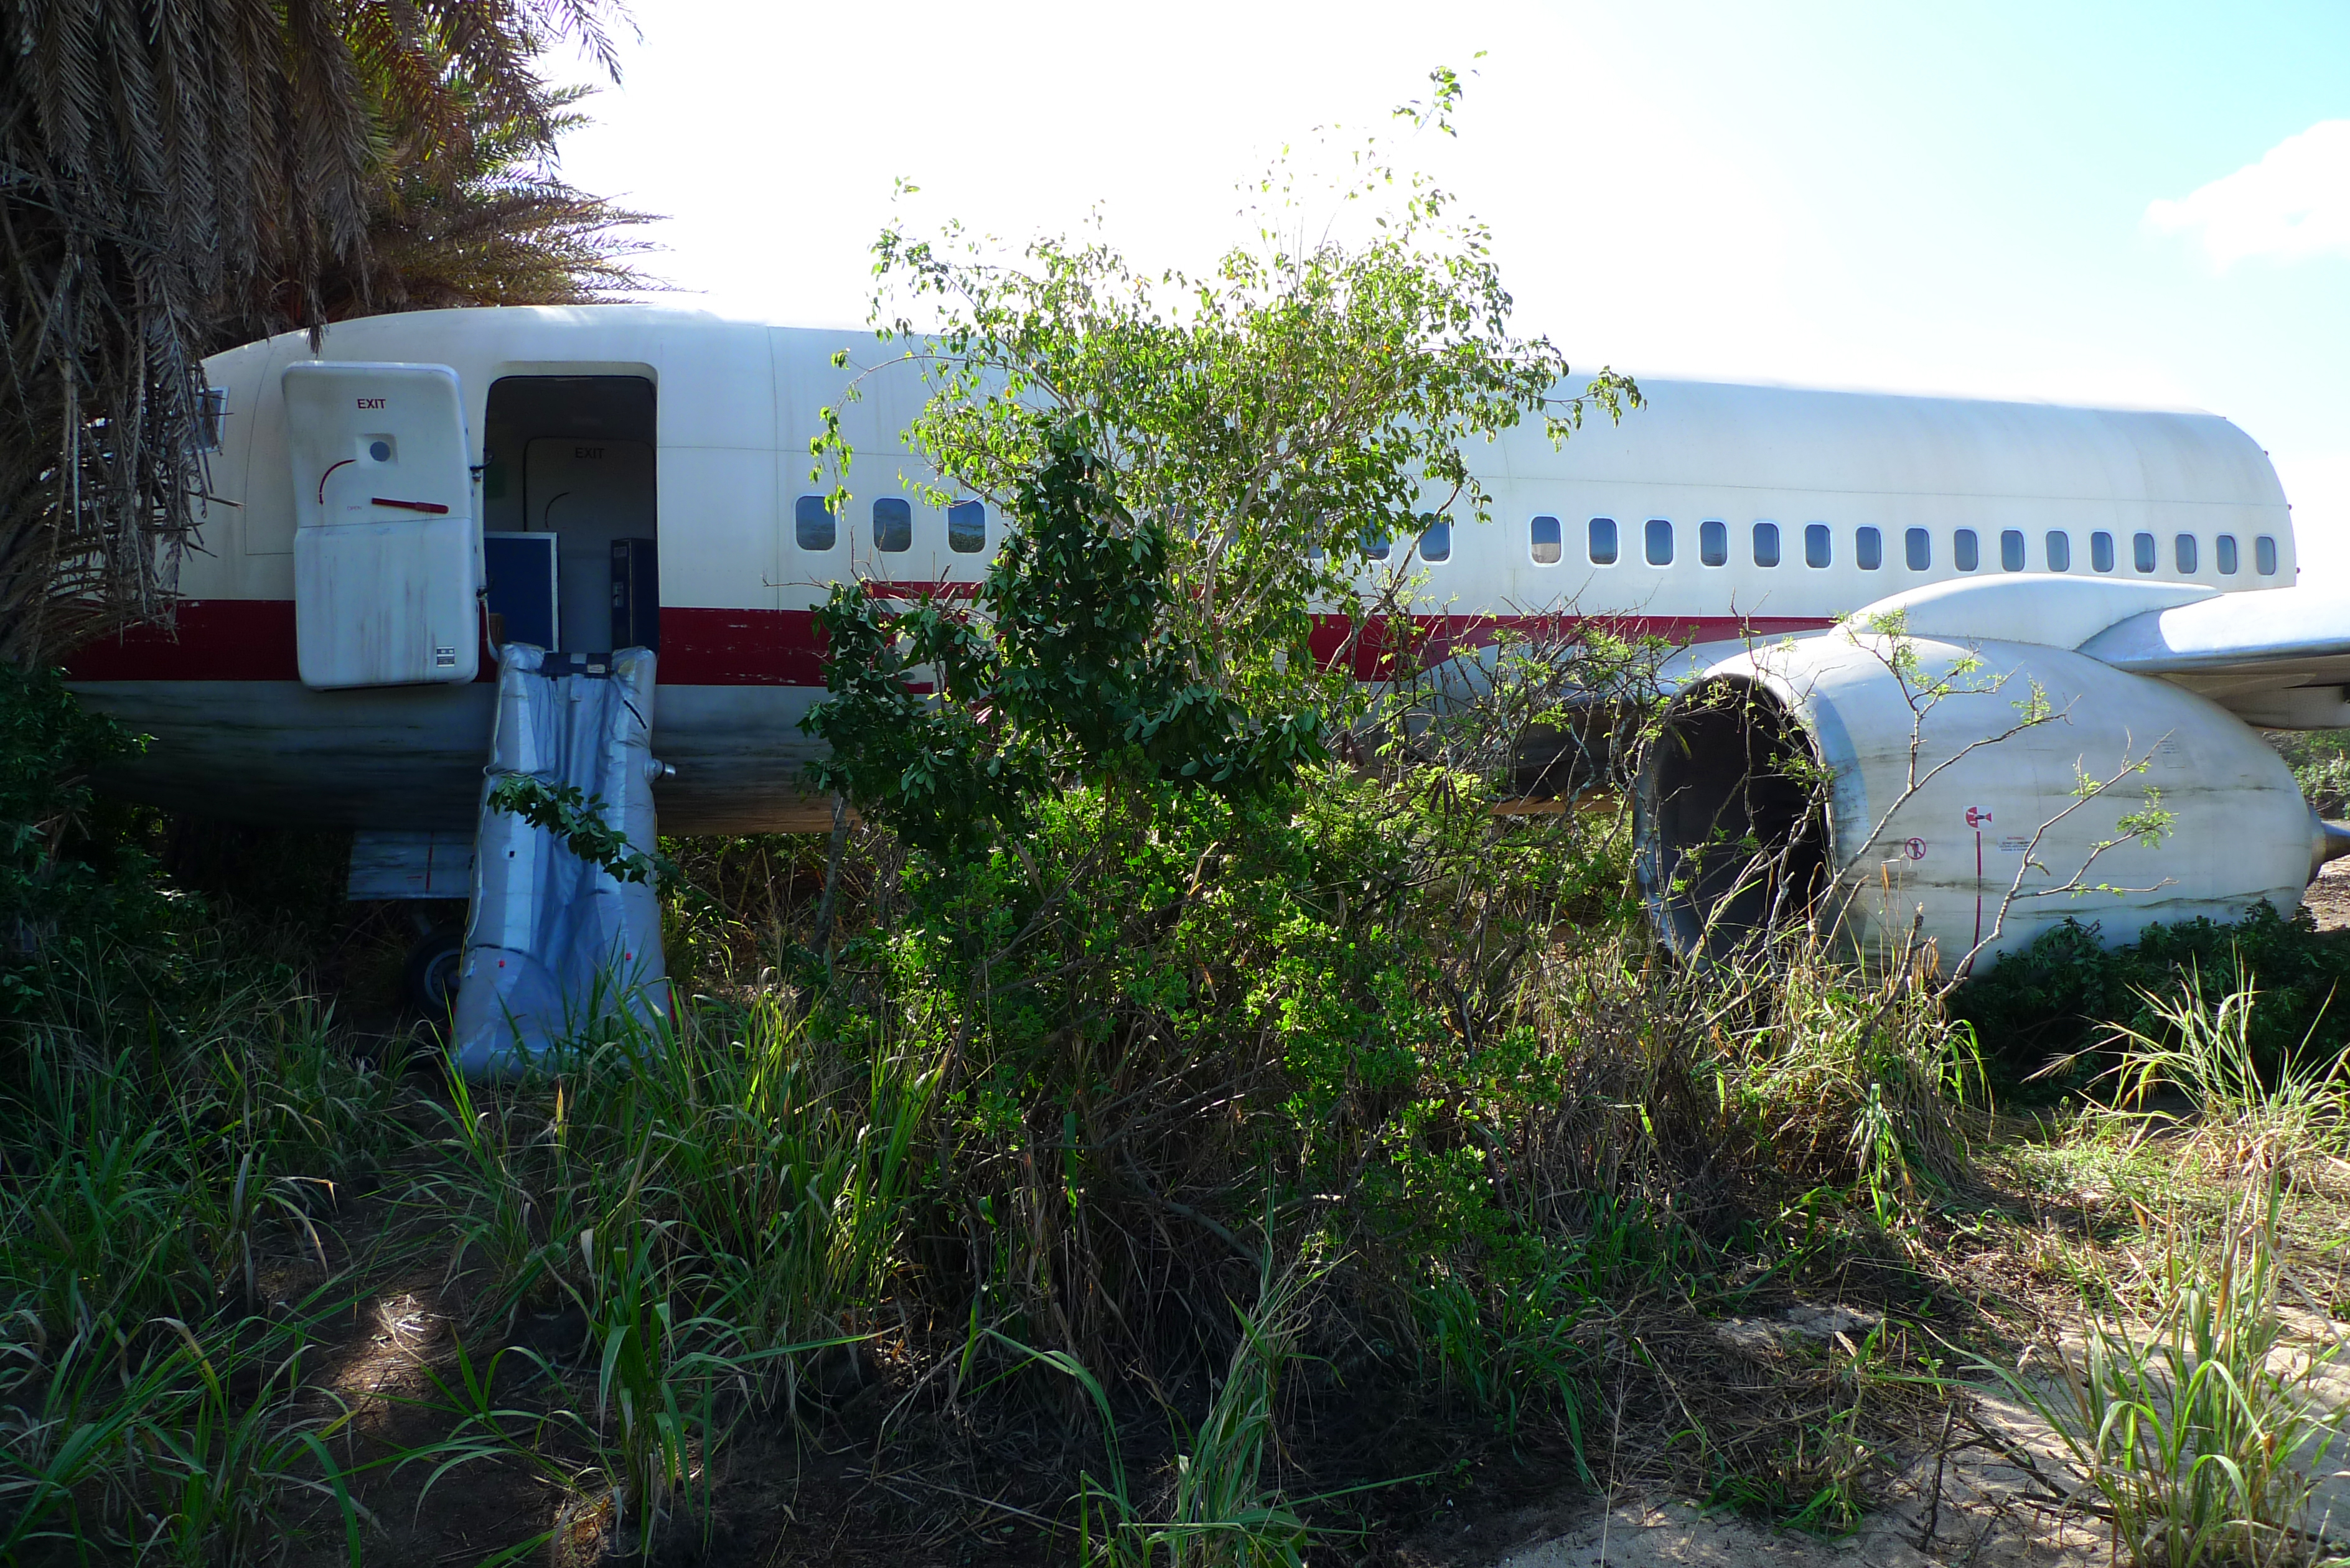 Ajira Airways' missing 737 in the jungle, built on location for 